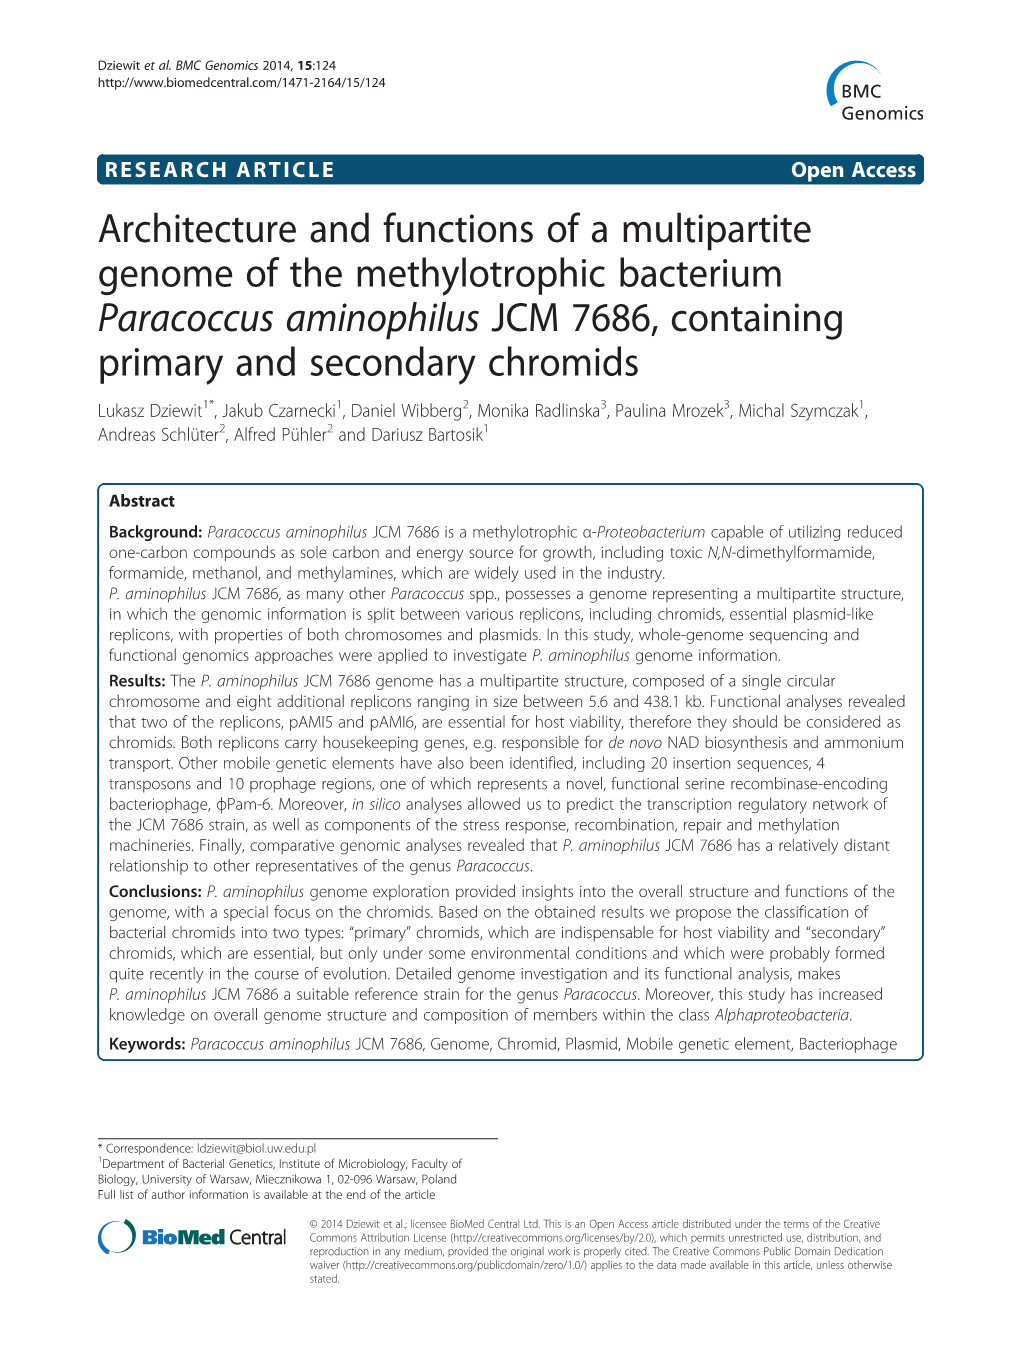 Architecture and Functions of a Multipartite Genome of The